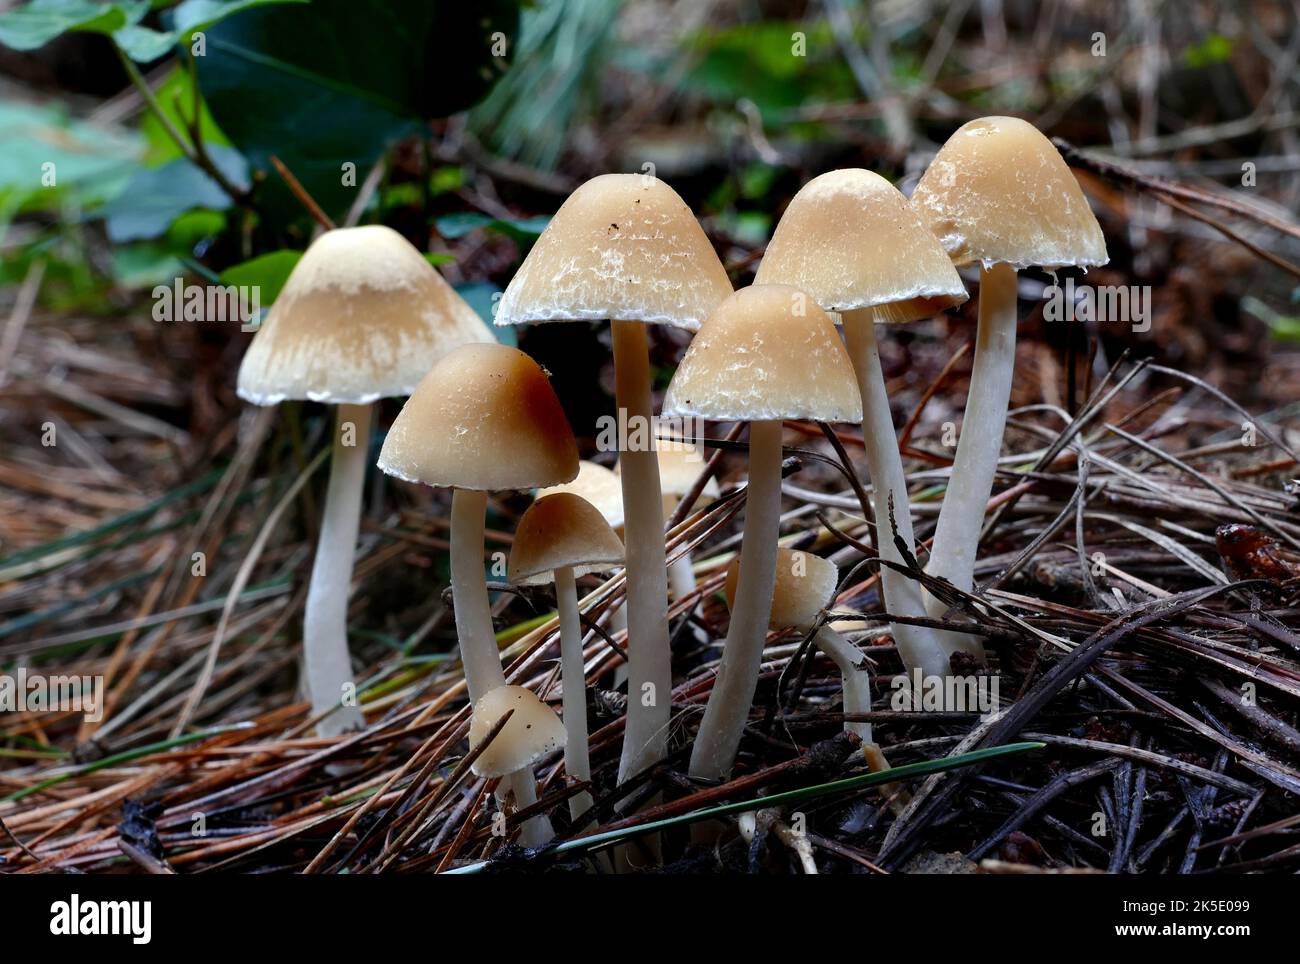 Likely Psathyrella, a large genus of about 400 species, and is similar to the genera Coprinellus, Coprinopsis, Coprinus and Panaeolus, usually with a thin cap and white or yellowish white hollow stem. The caps do not self digest as do those of Coprinellus and Coprinopsis. Some also have brown spores rather than black. These fungi are often drab-colored, difficult to identify, and all members are considered inedible or worthless (for eating) and so they are often overlooked. However they are quite common and can occur at times when there are few other mushrooms to be seen. Credit: BSpragg Stock Photo